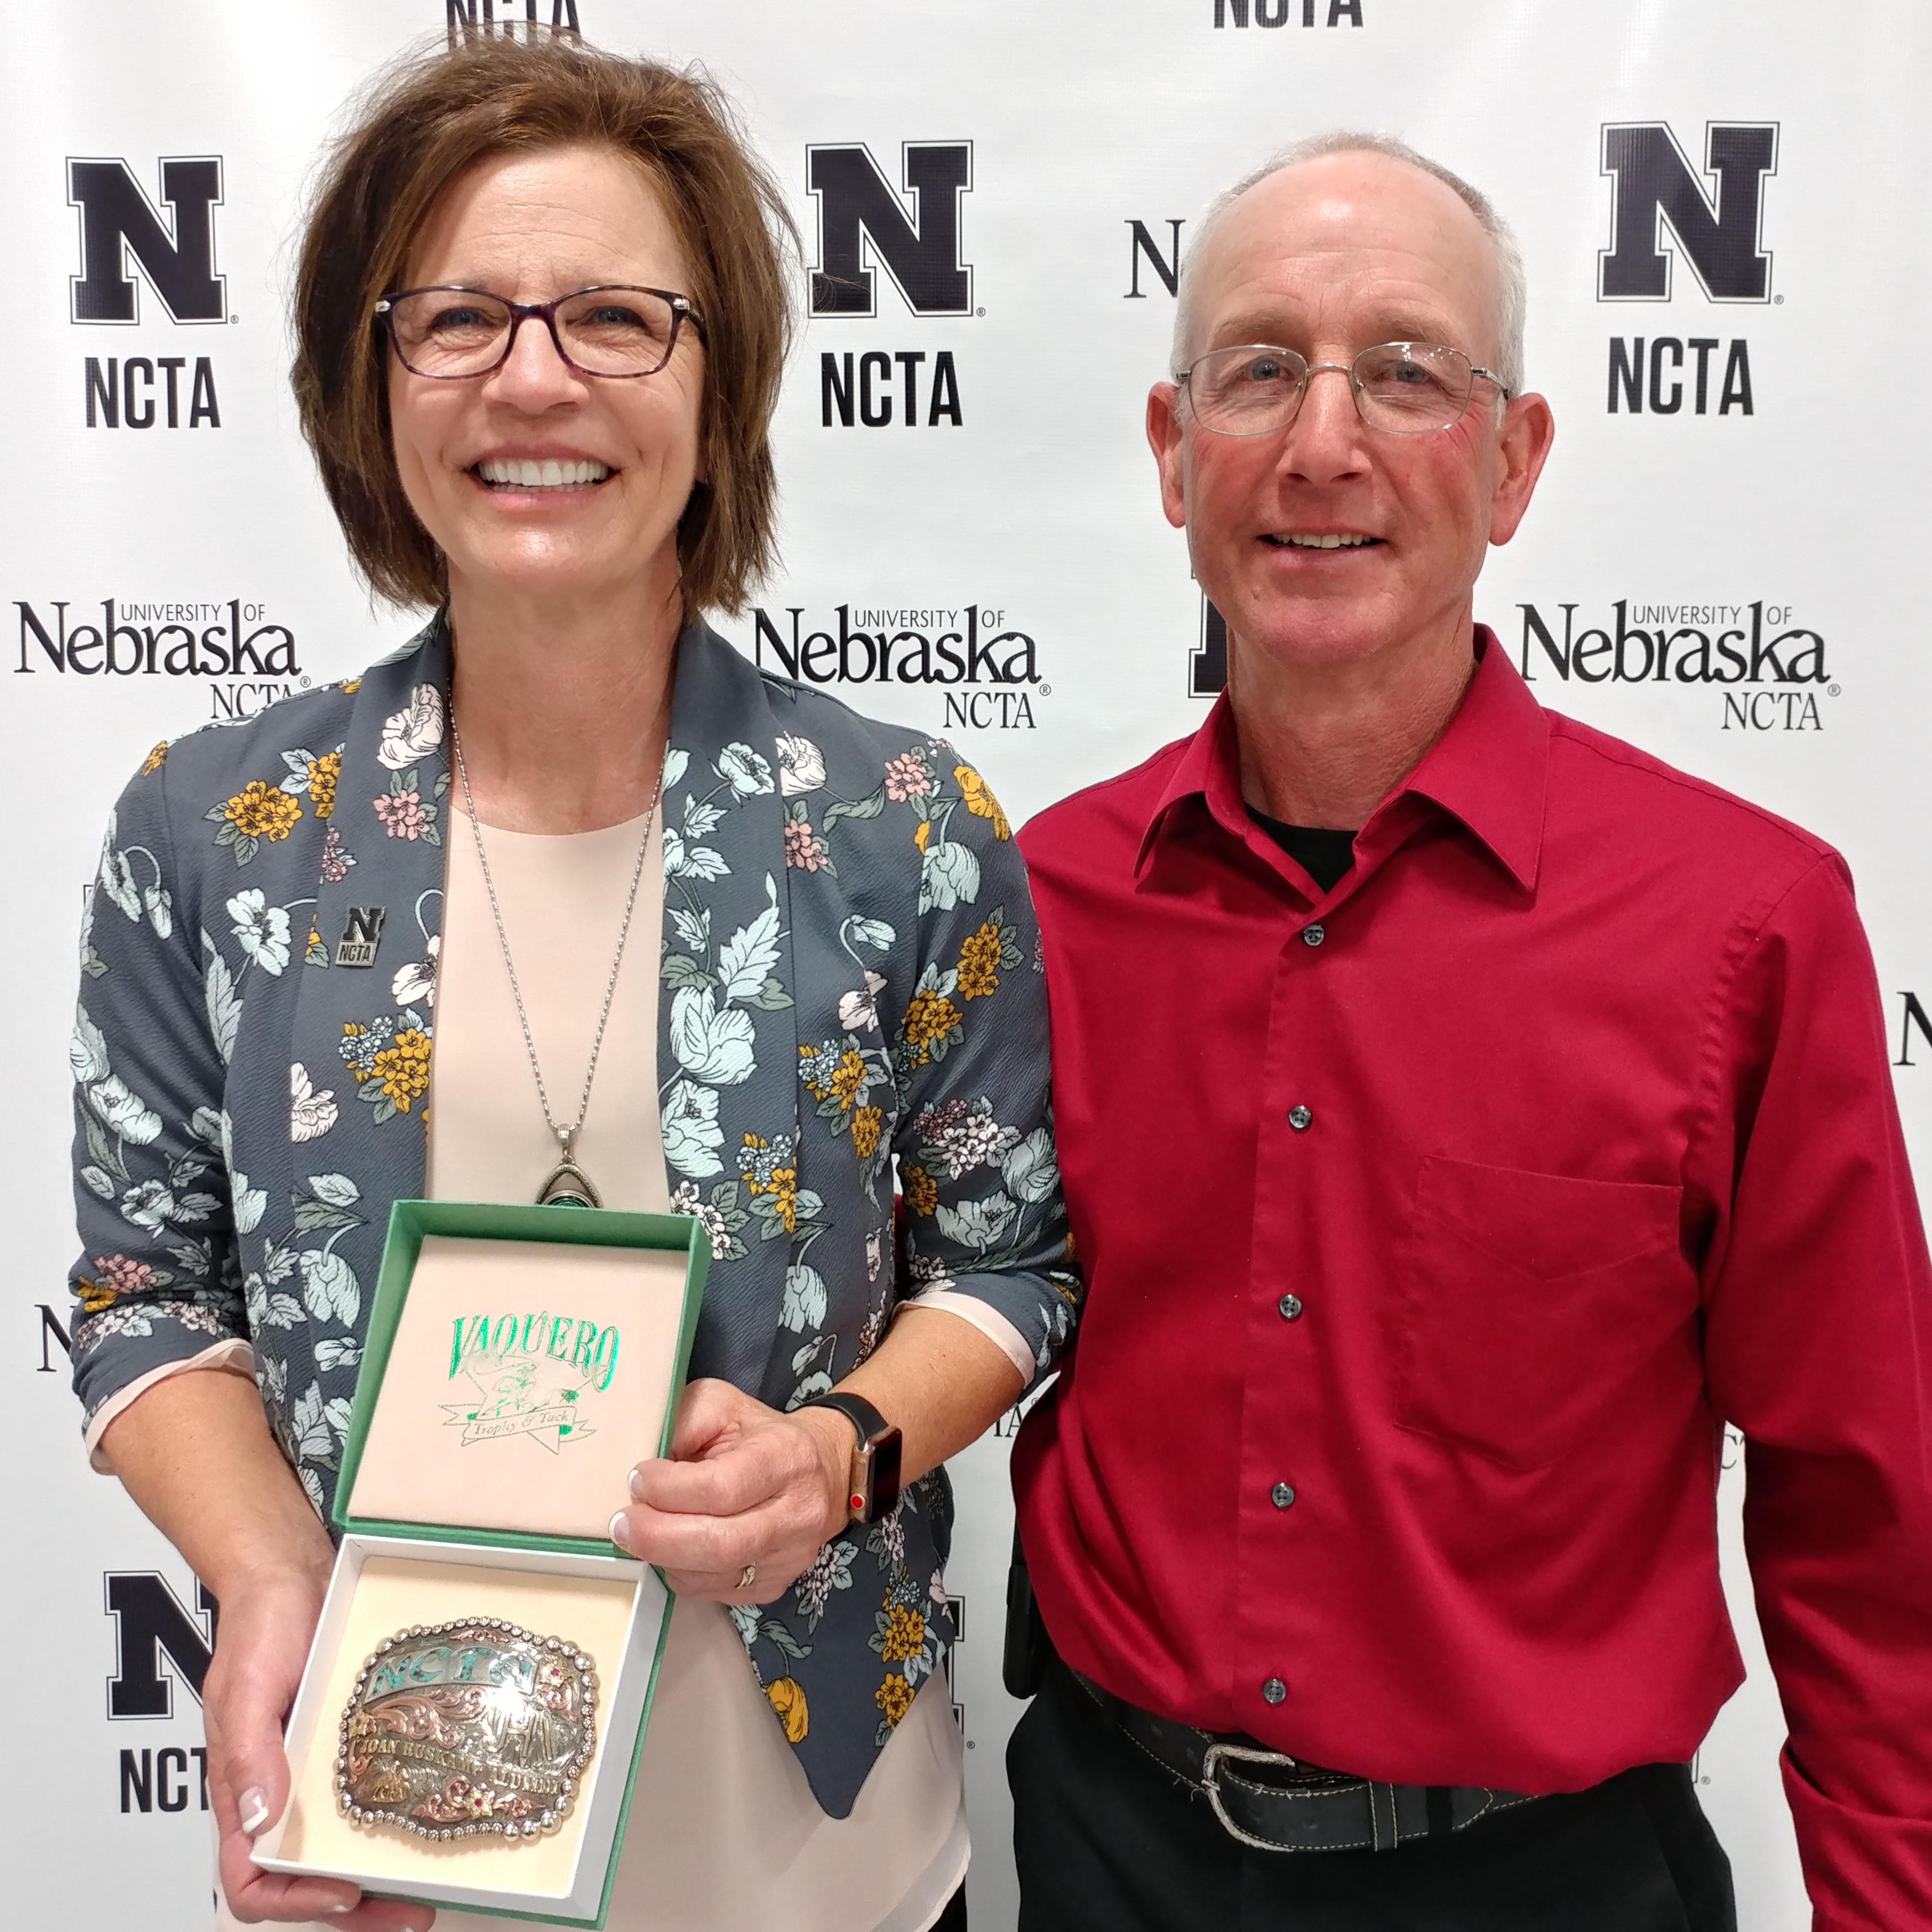 Joan and Steve Ruskamp of Dodge, UNSTA alumni from '80 and '76, returned to Curtis for 2019 Commencement where Joan gave a keynote message to graduates. She received an NCTA belt buckle. (NCTA photo)